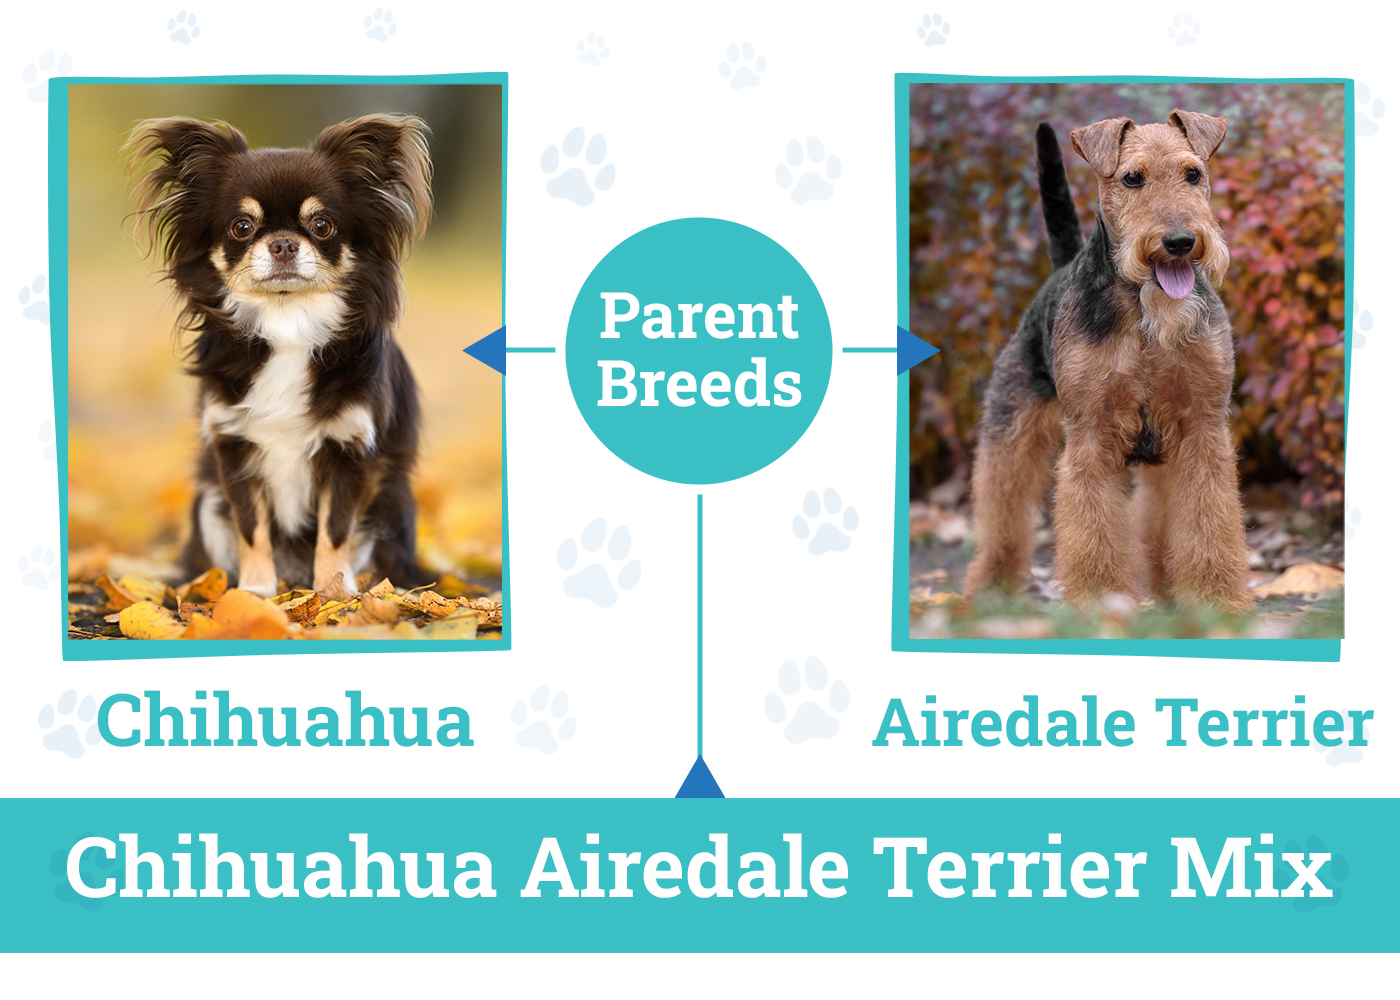 Parent Breeds of the Chihuahua Airedale Terrier Mix